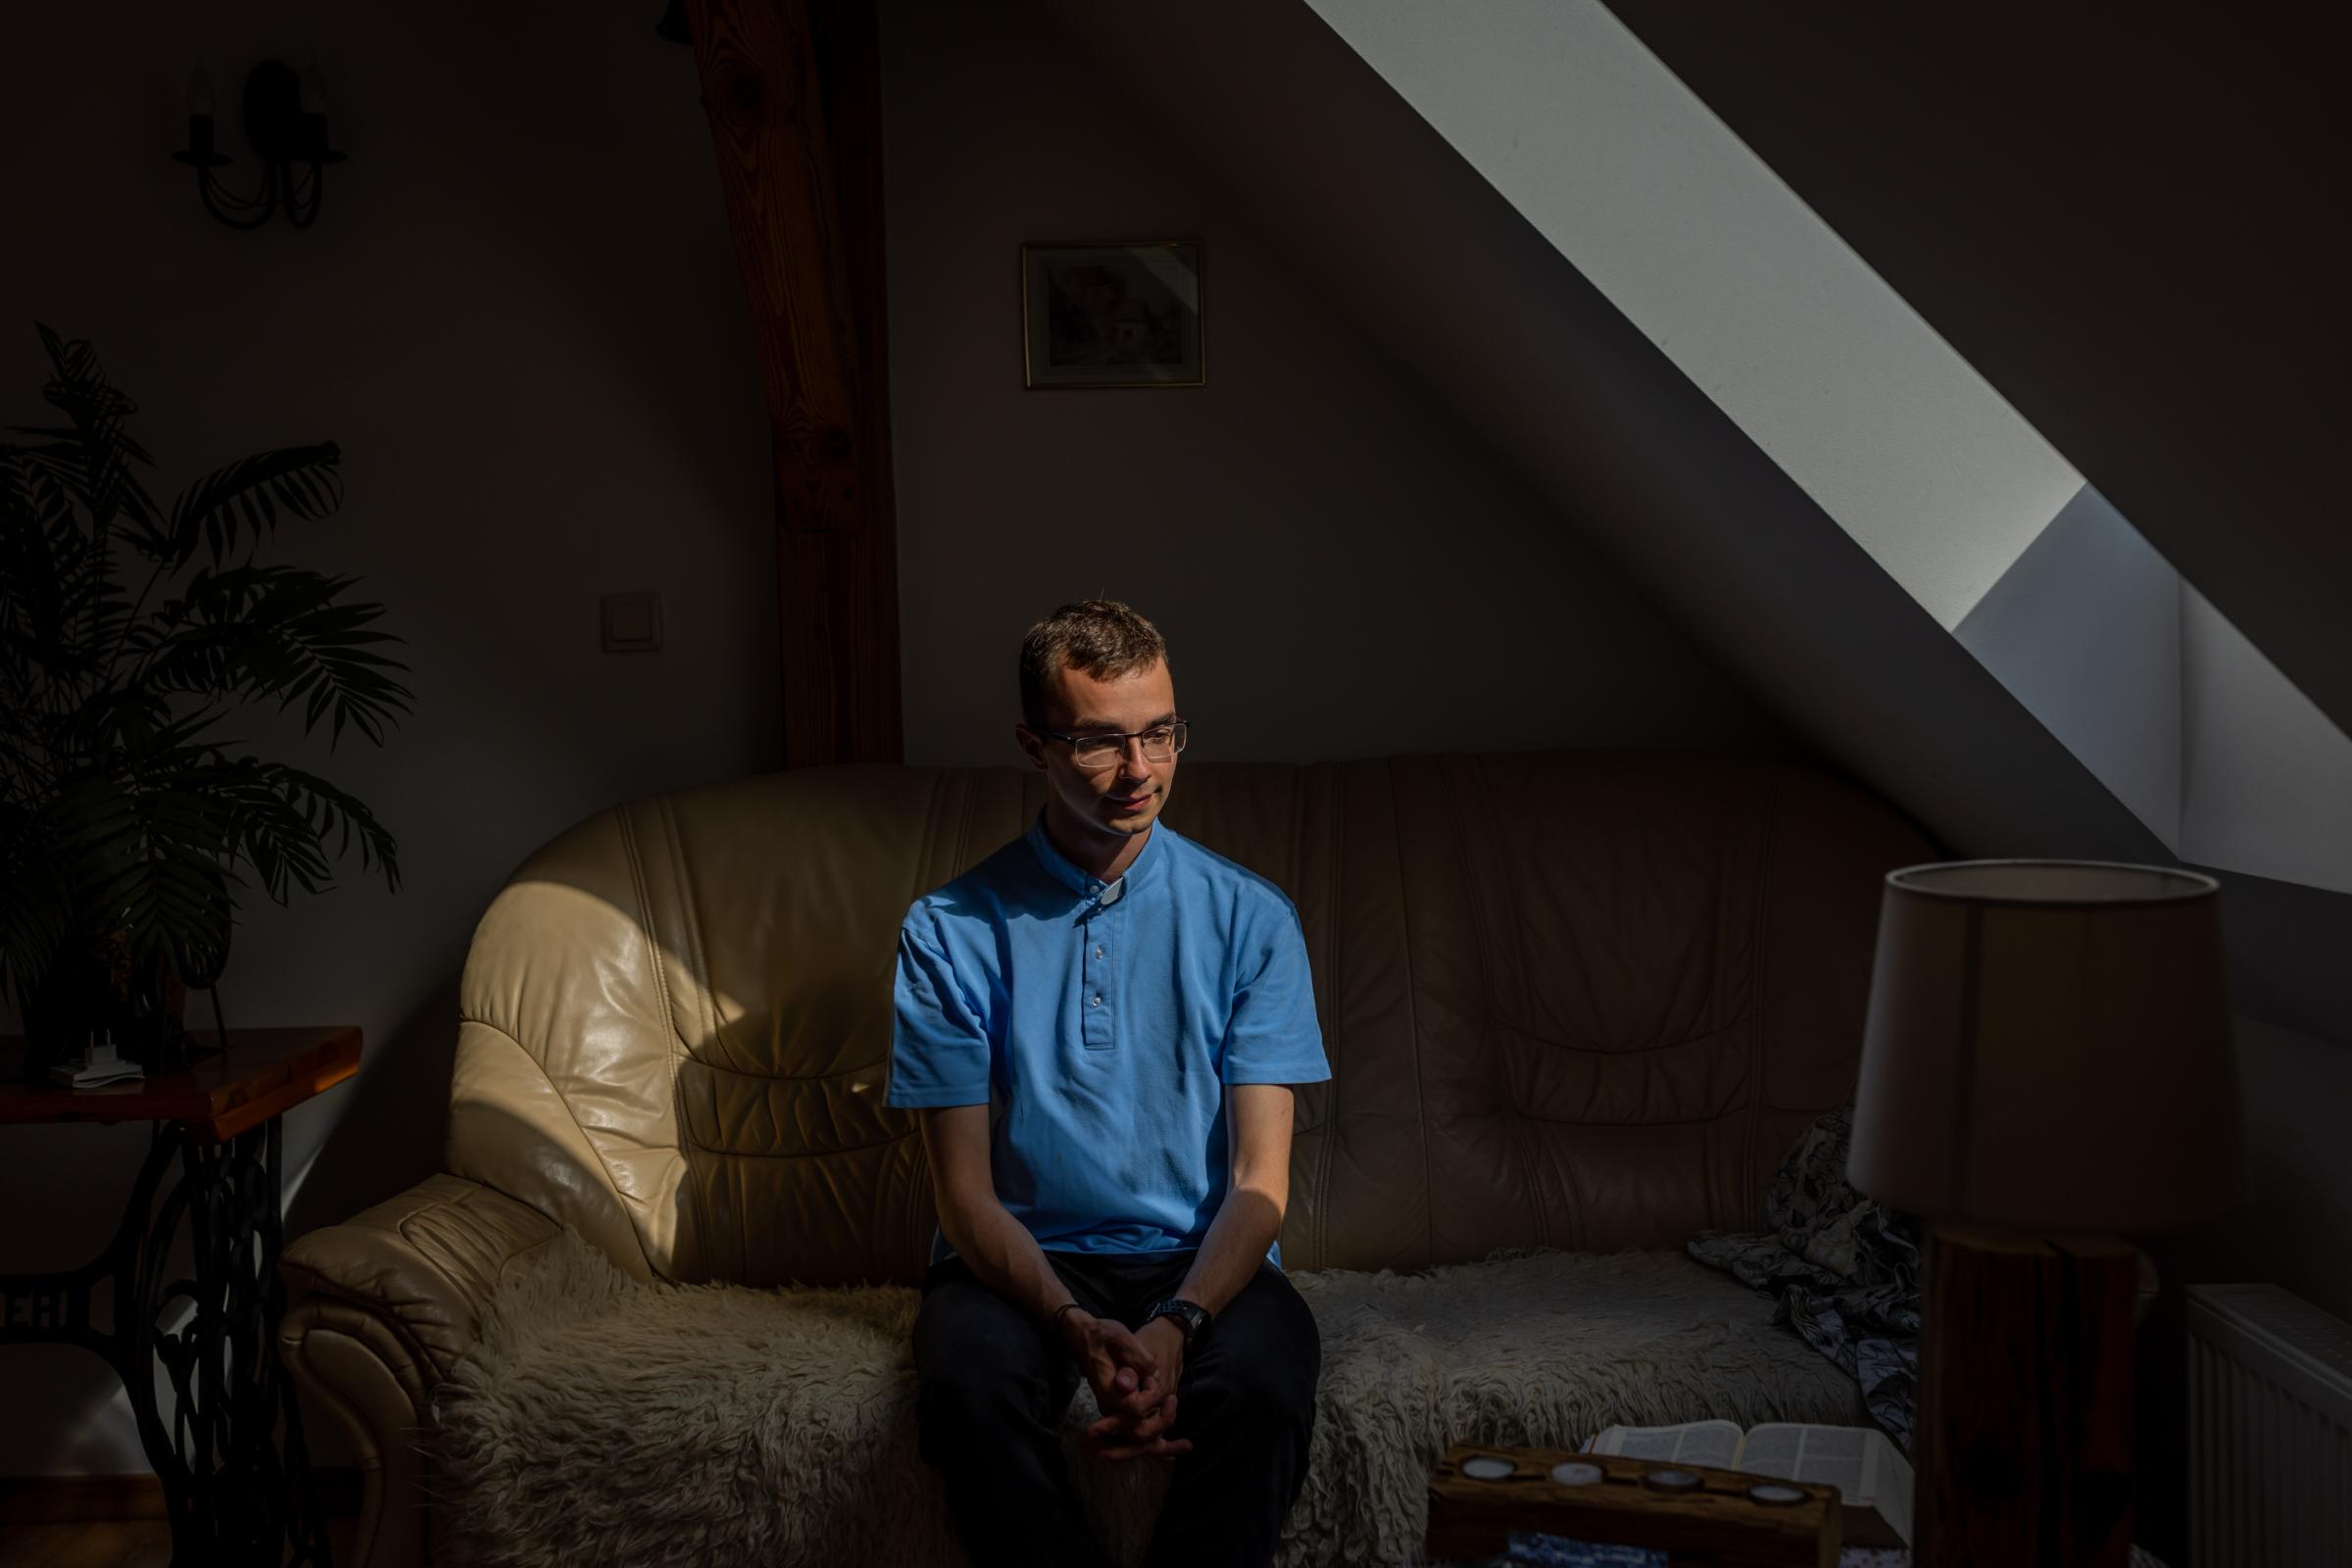 LONELY POLISH PRIEST -for NRC - Cleric Krzysztof Dzikowski in his family home during the...